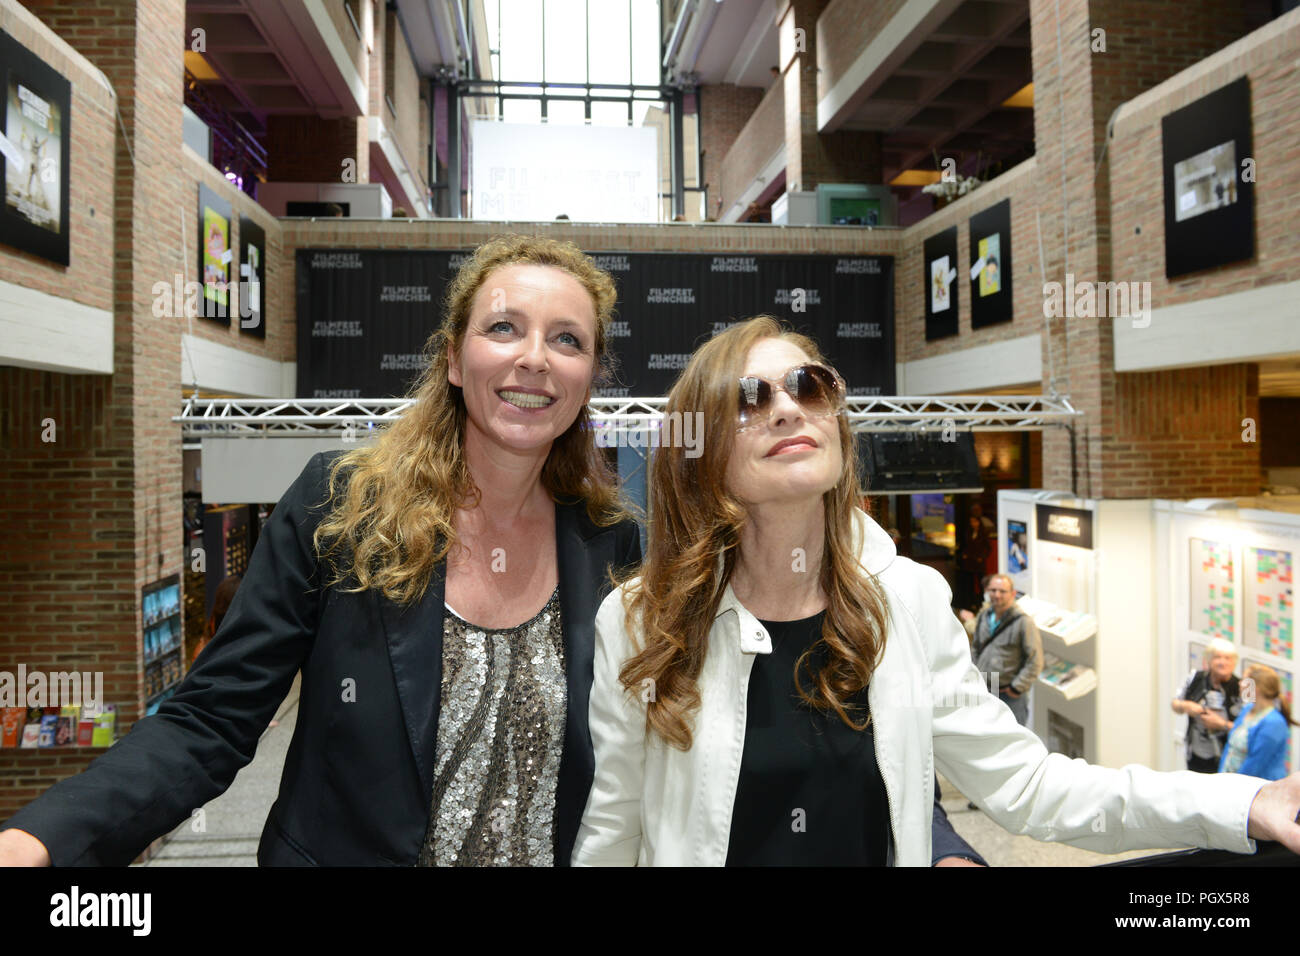 Actress Isabelle Huppert arrives at Filmfest München 2014 with festival director Diana Iljine Stock Photo